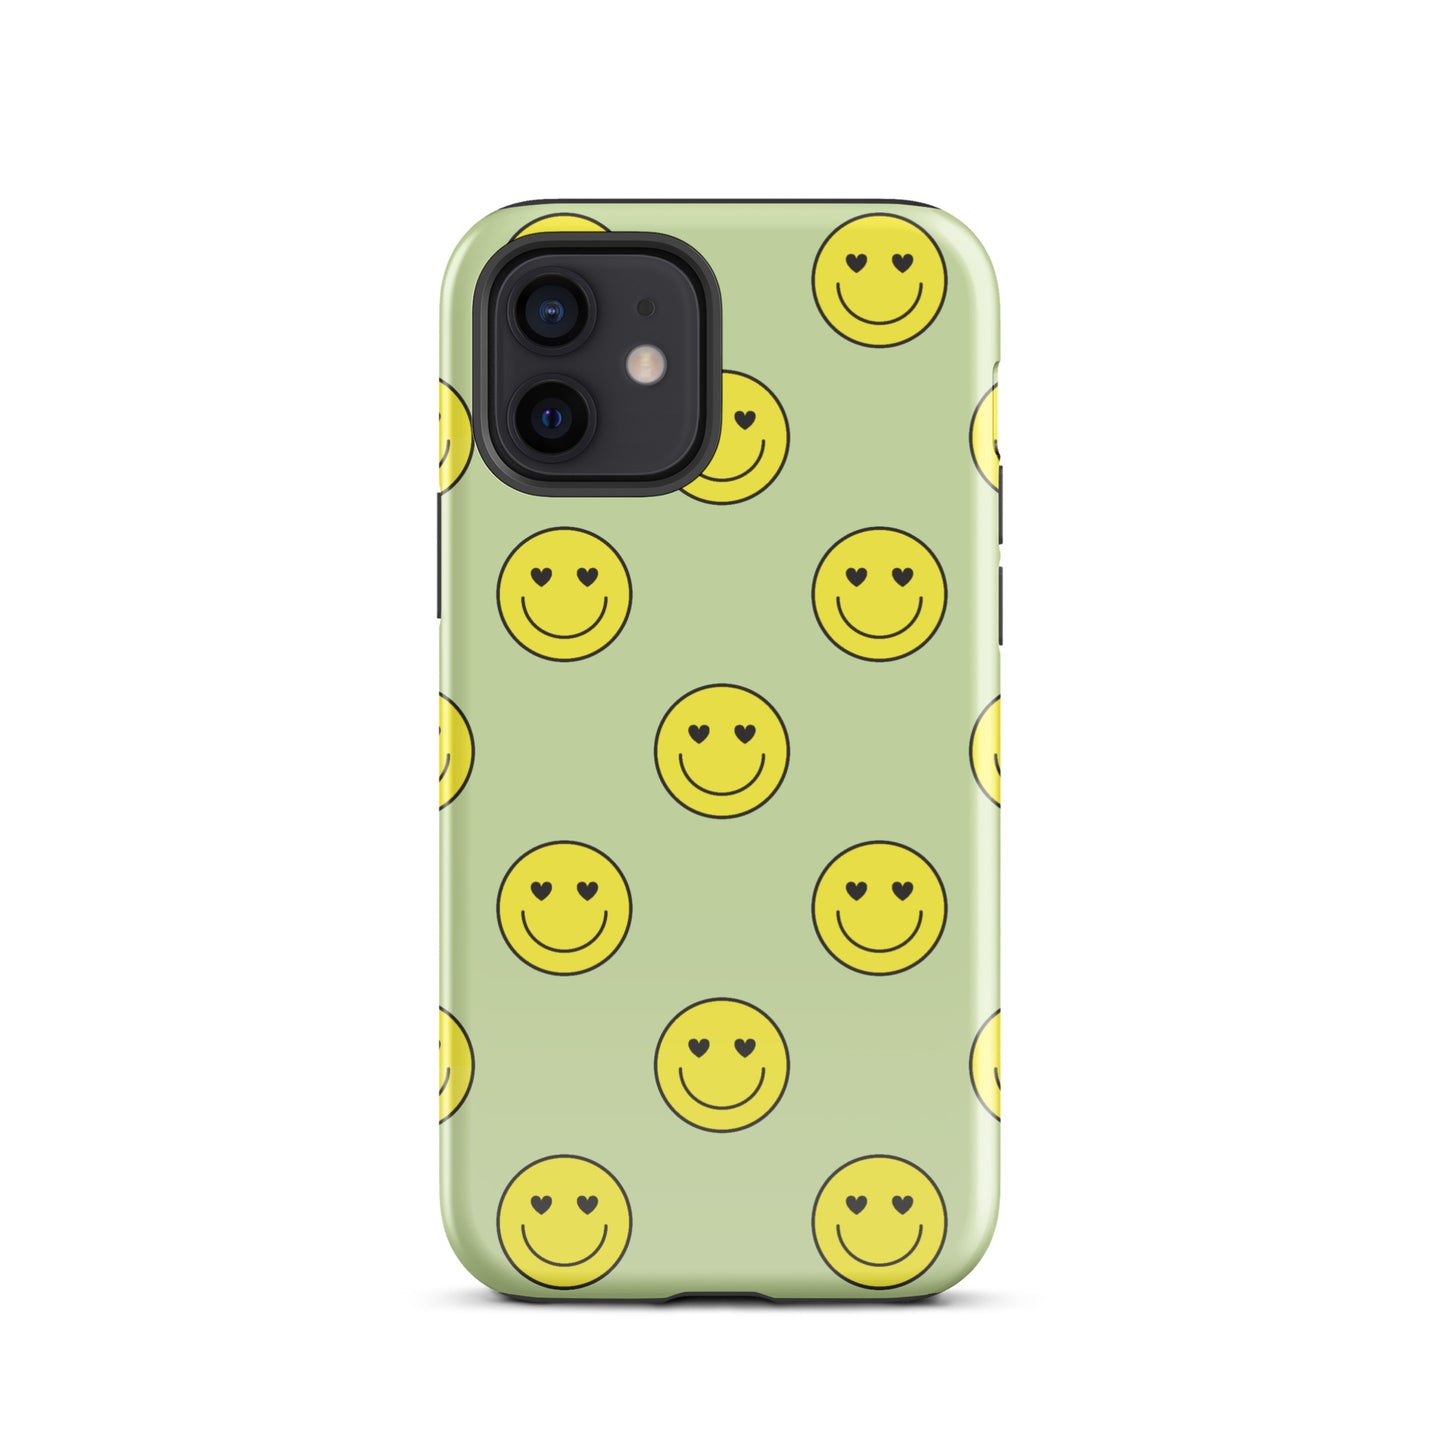 Neon Smiley Faces iPhone Case iPhone 12 Glossy